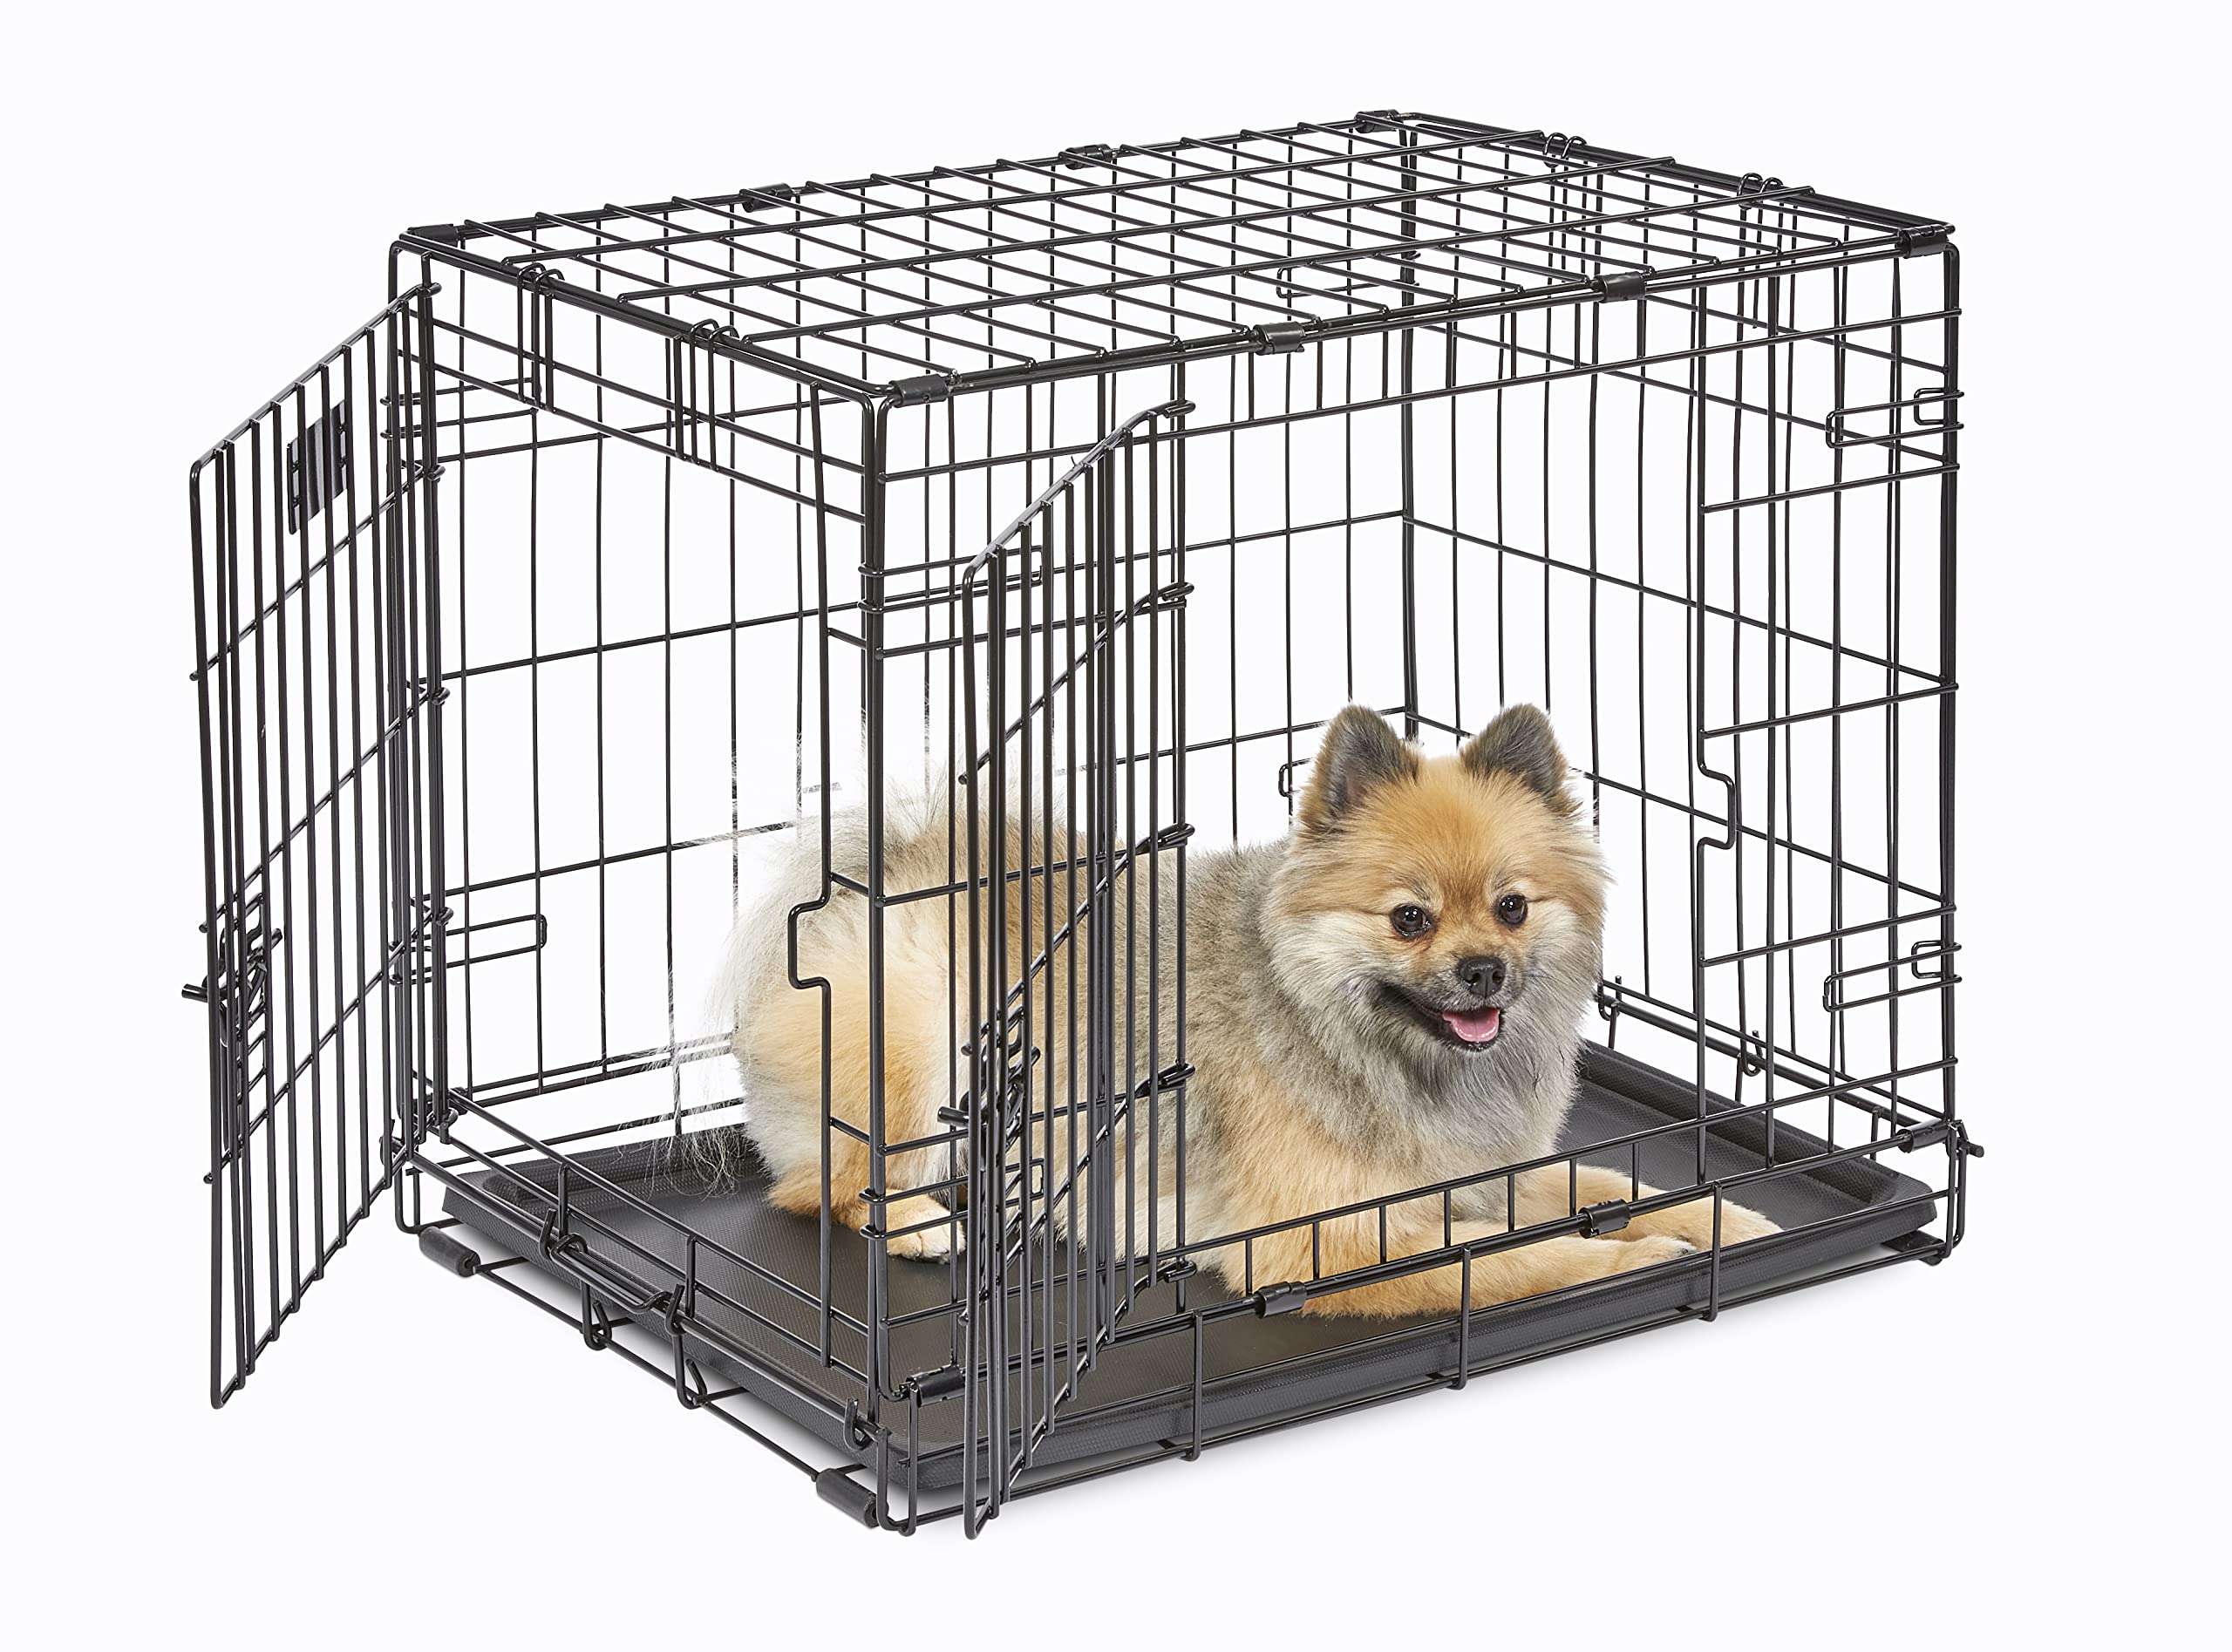 MidWest Homes for Pets Newly Enhanced Single & Double Door icrate Dog crate Includes Leak-Proof Pan Floor Protecting Feet Divide